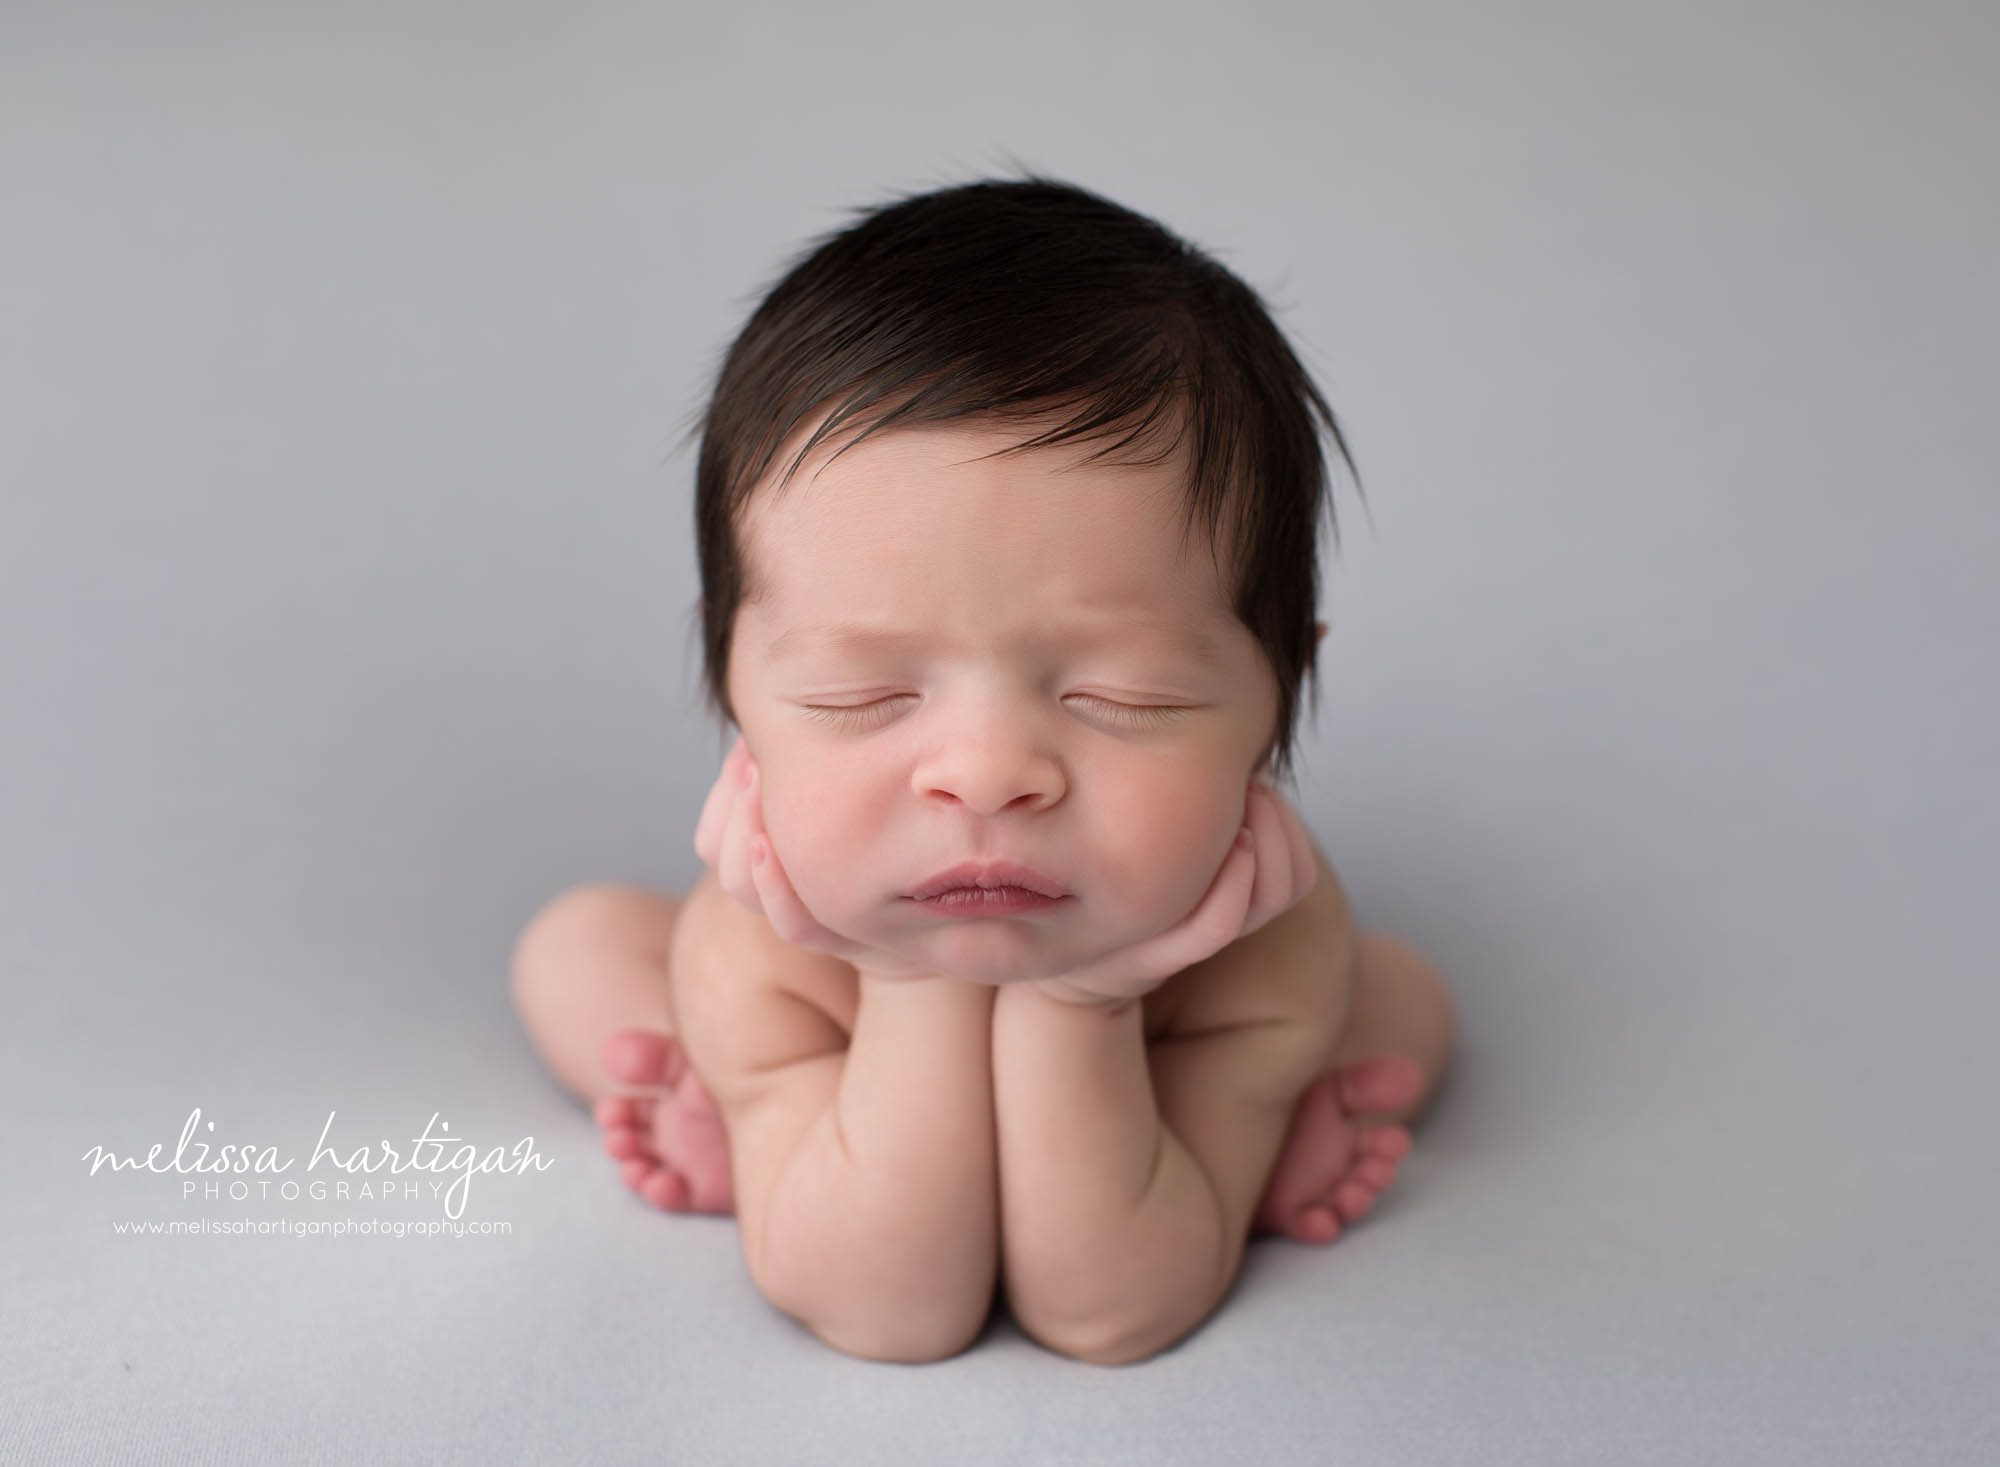 newborn baby boy posed froggy pose on gray backround newborn photography middlesex county